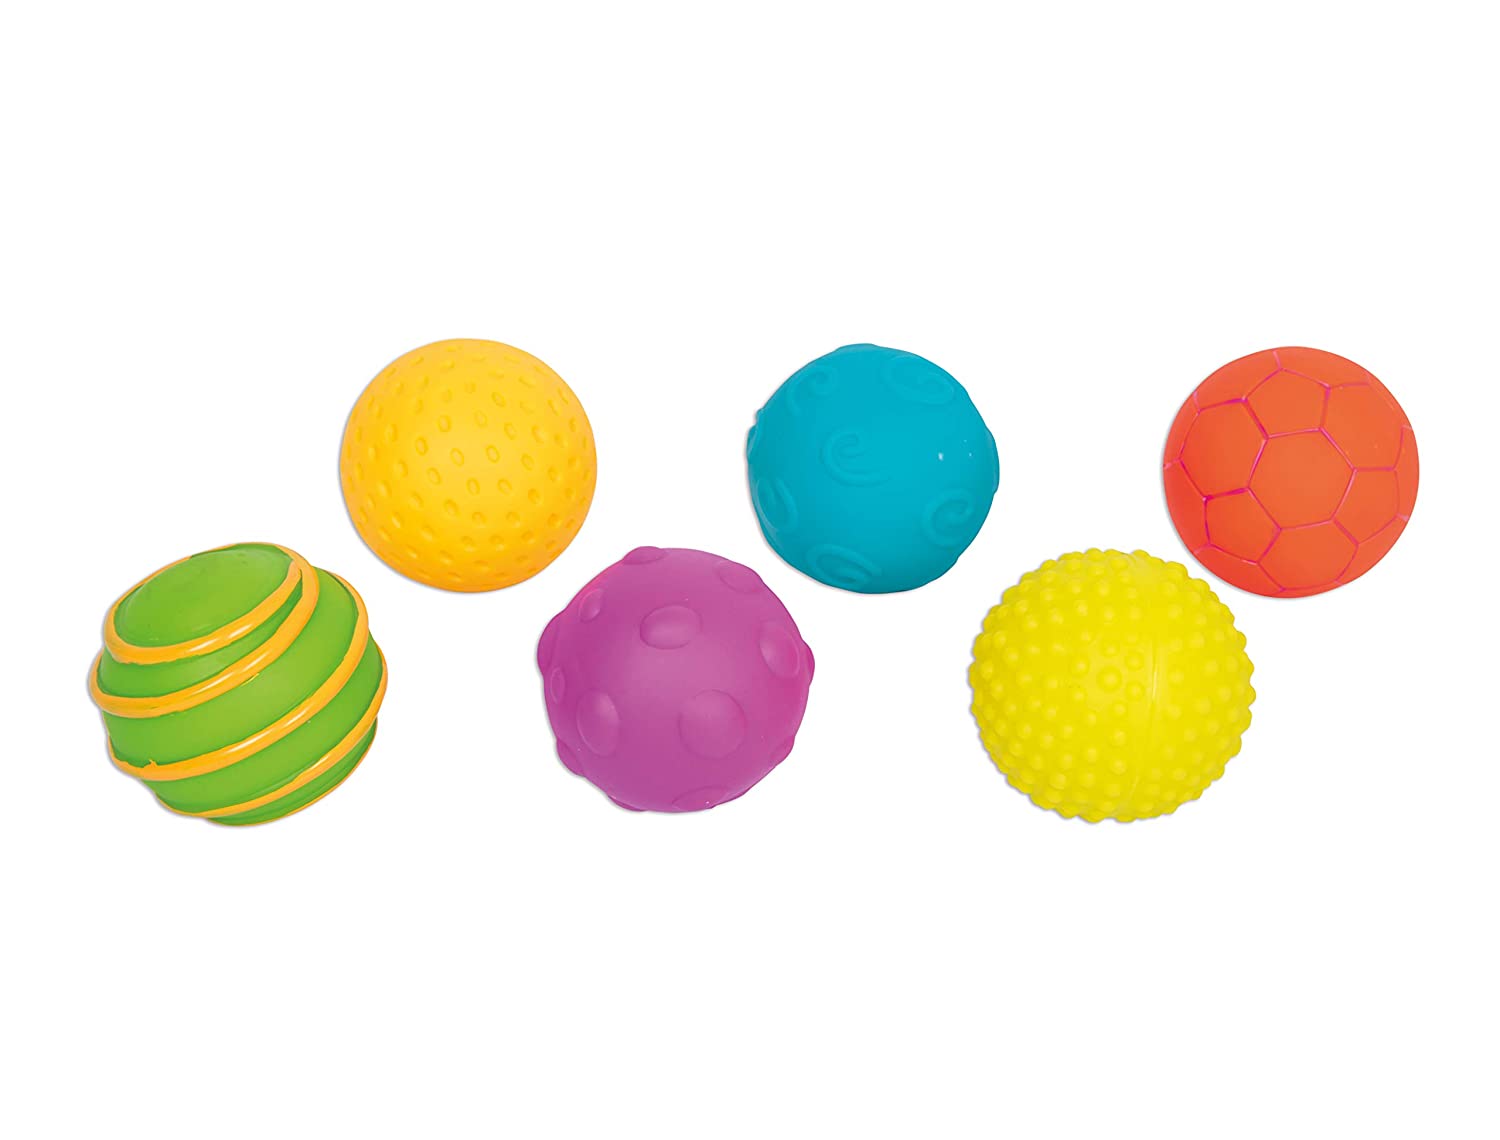 TickiT Sensory Texture Balls - Soft Toys for Toddlers Aged 6M+